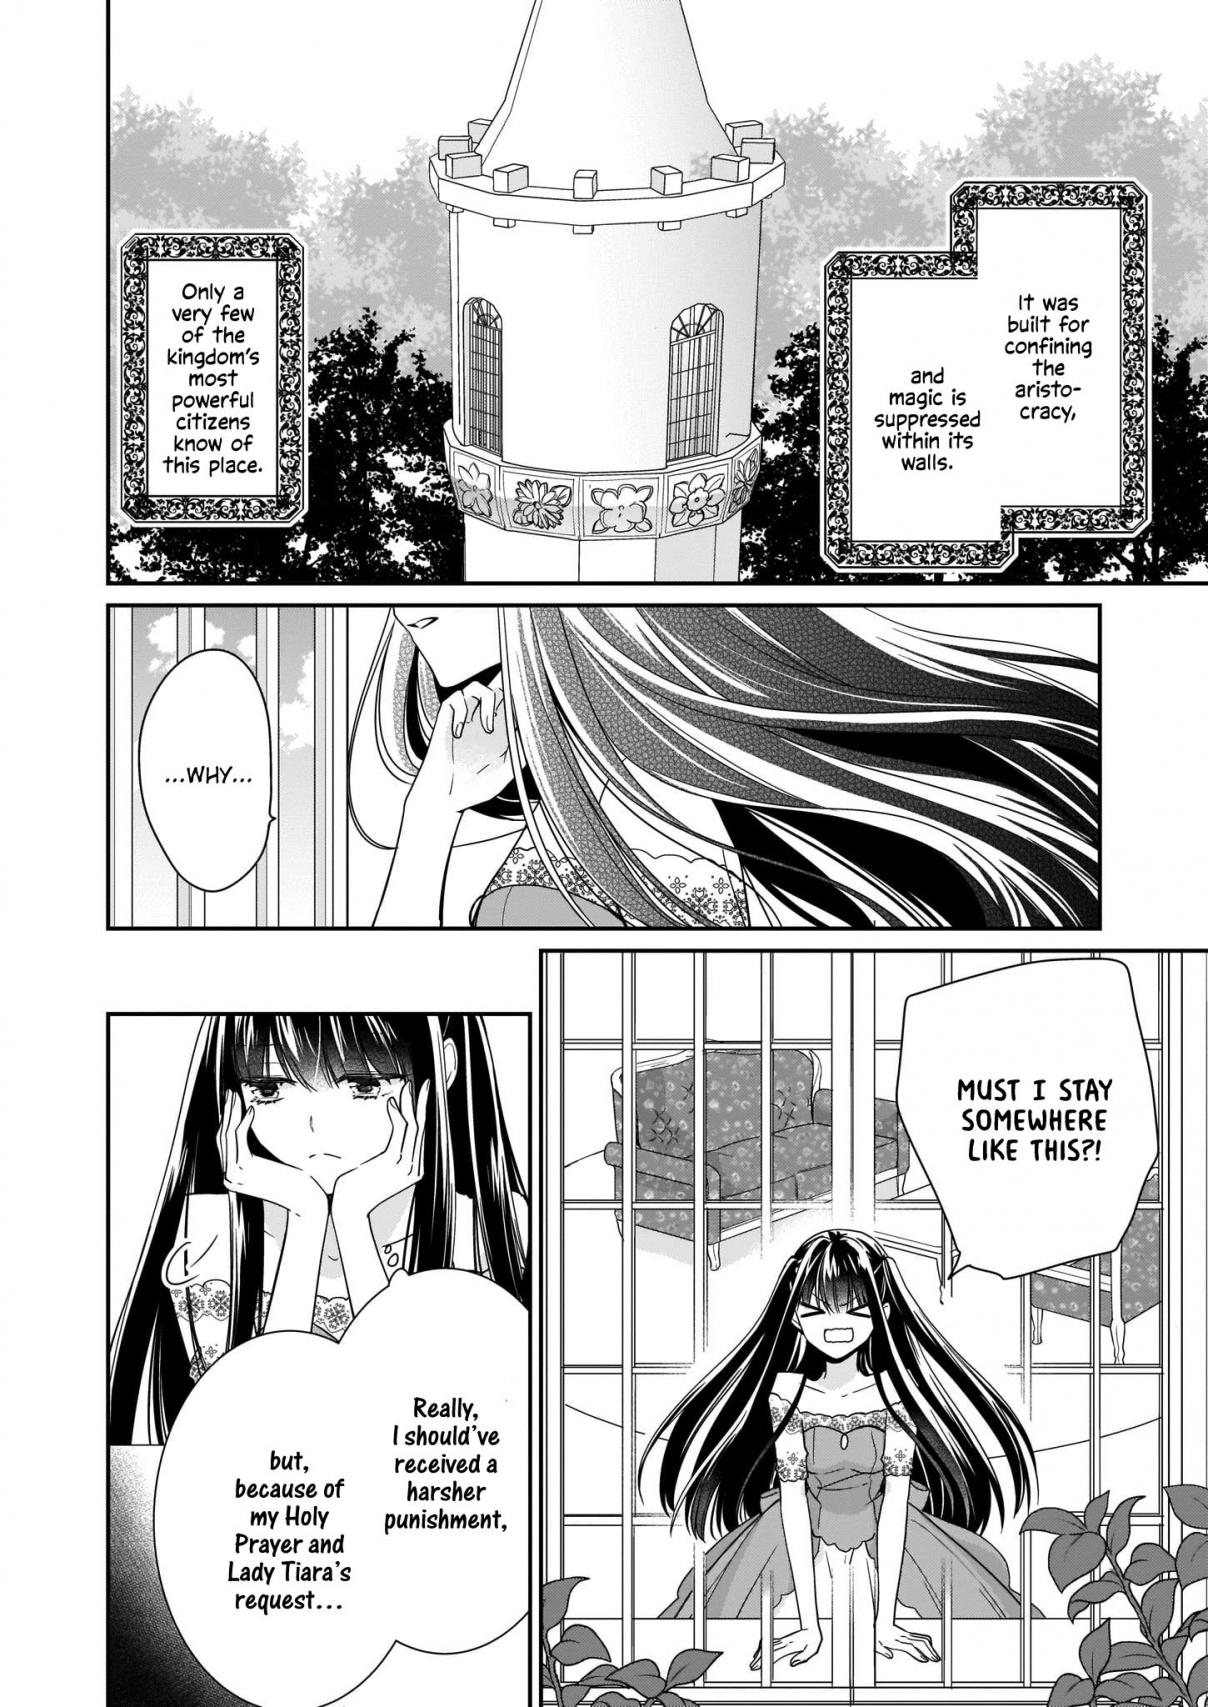 The Villainess Is Adored by the Crown Prince of the Neighboring Kingdom Vol. 3 Ch. 12